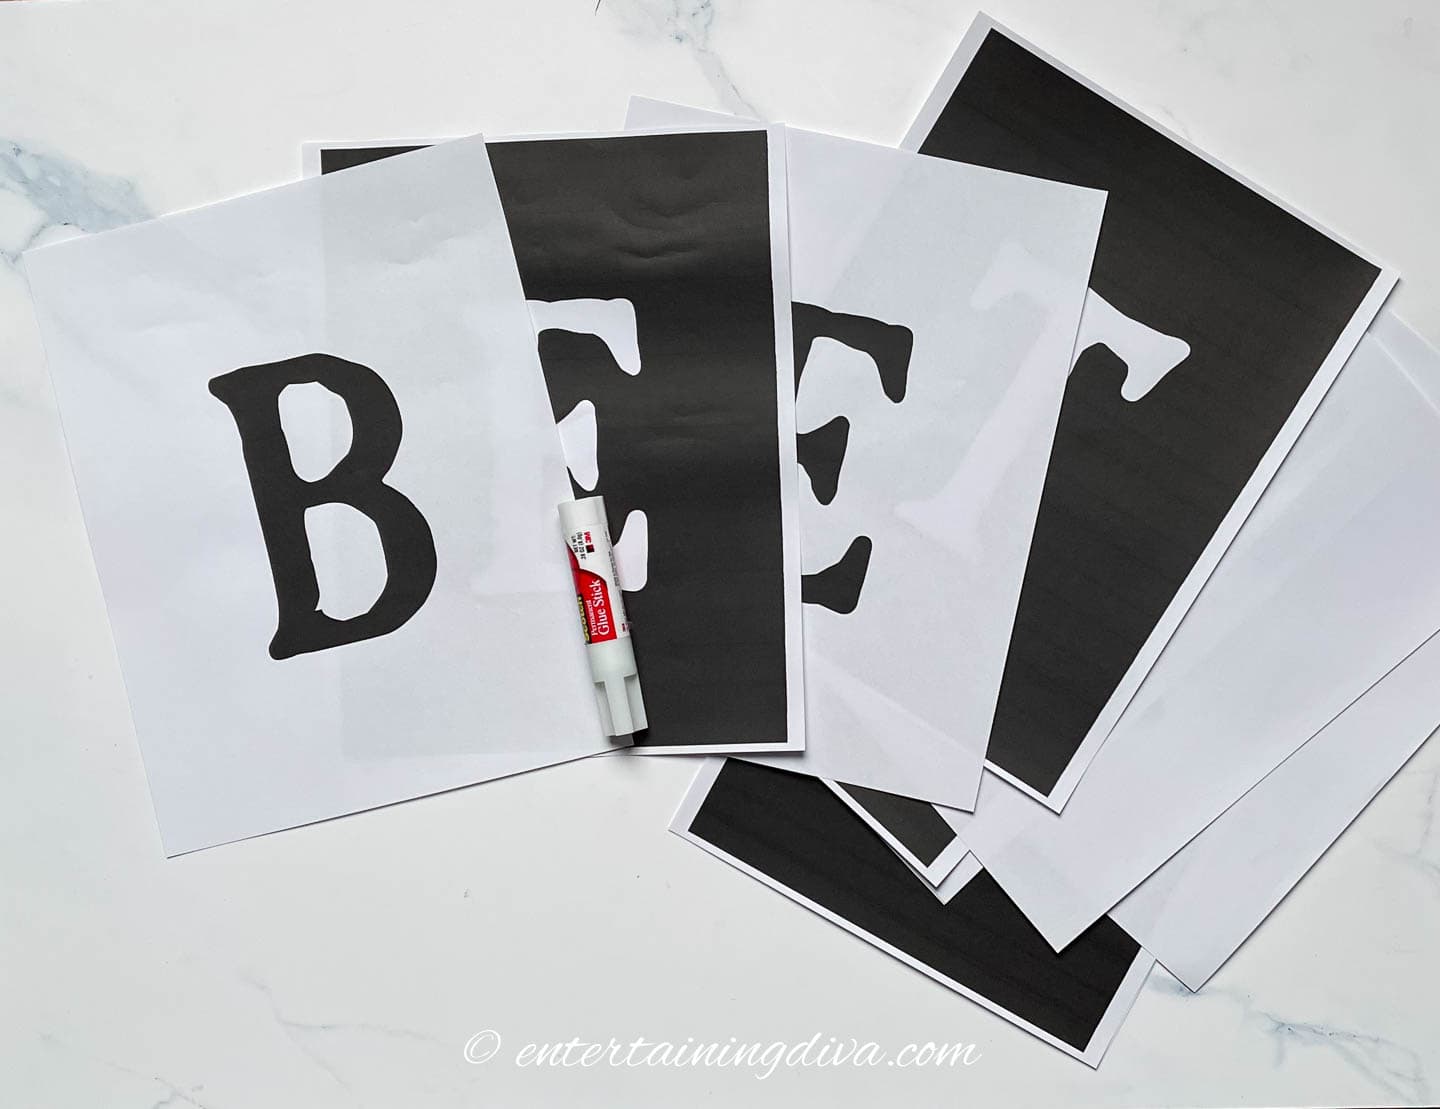 printed Beetlejuice banner letters and a glue gun